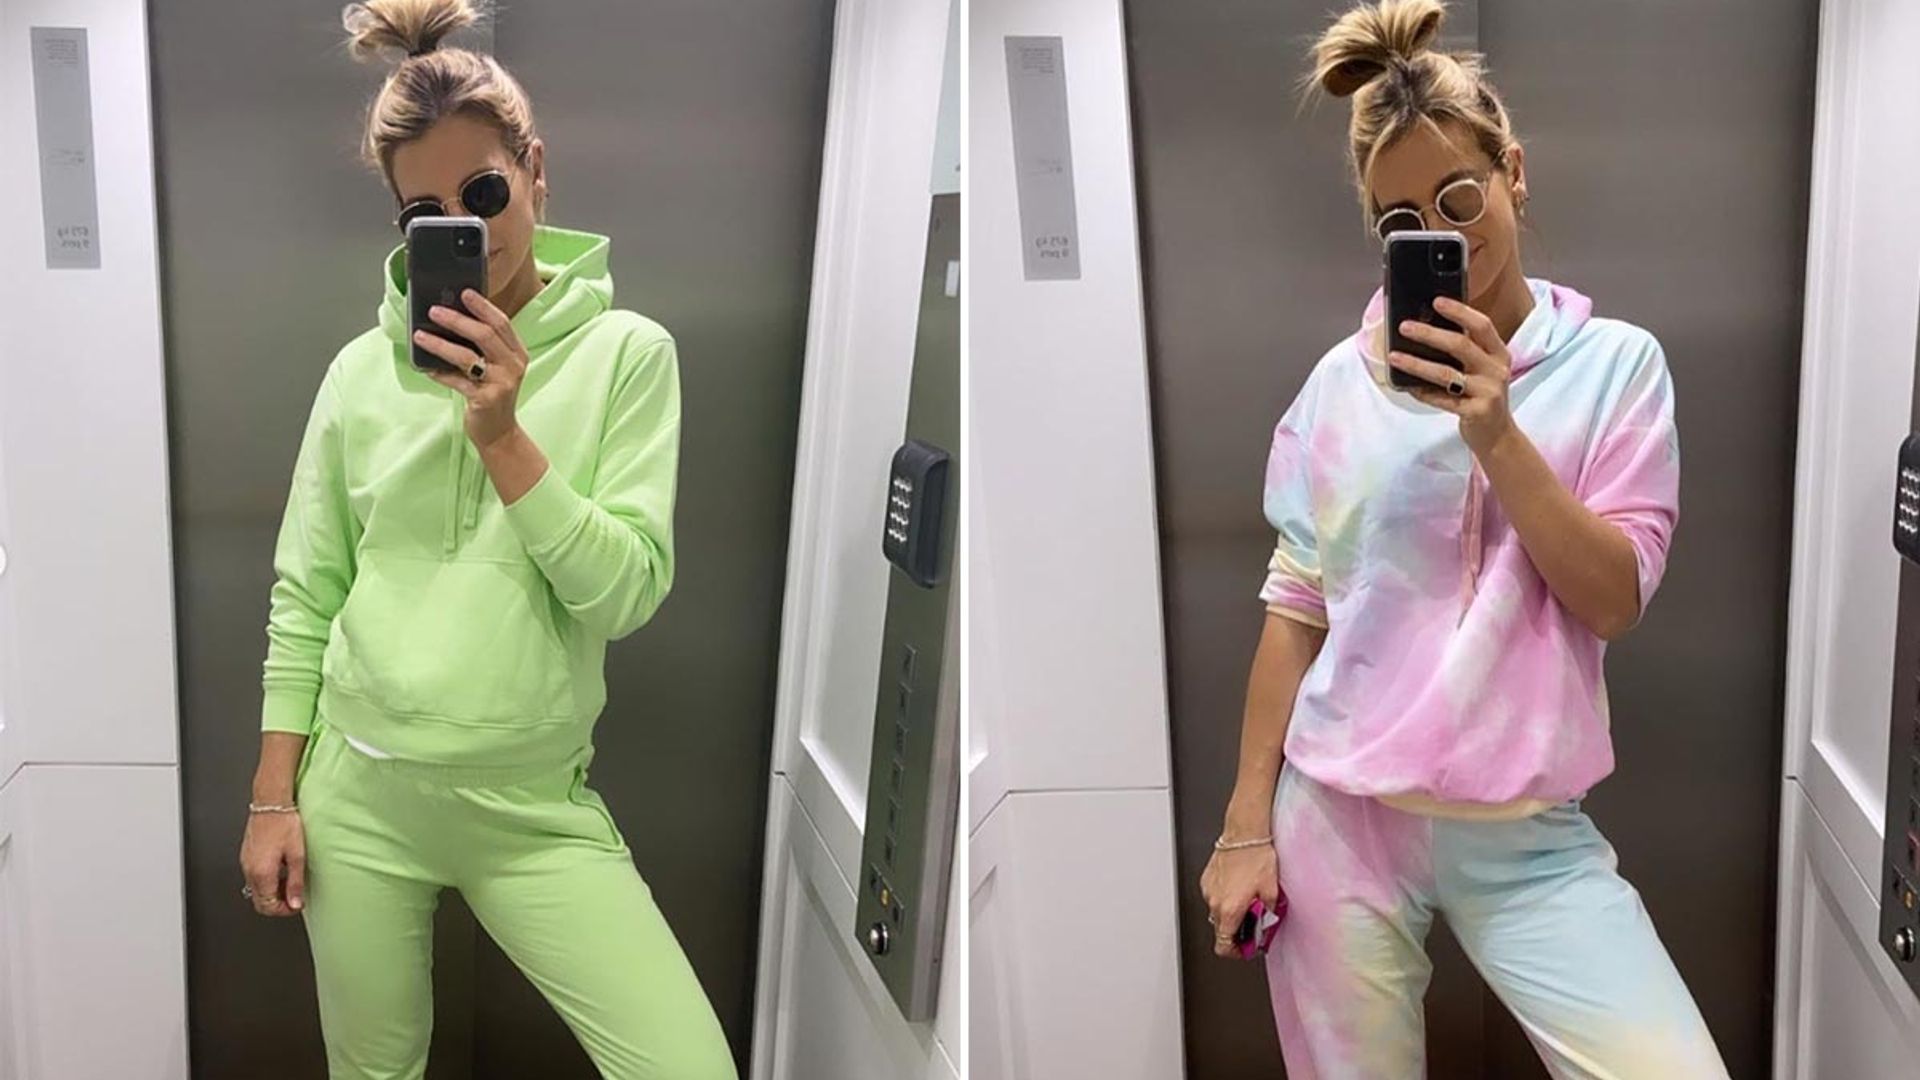 Vogue Williams rocks bright tracksuits & it'll make you want to ditch the grey jogging bottoms 